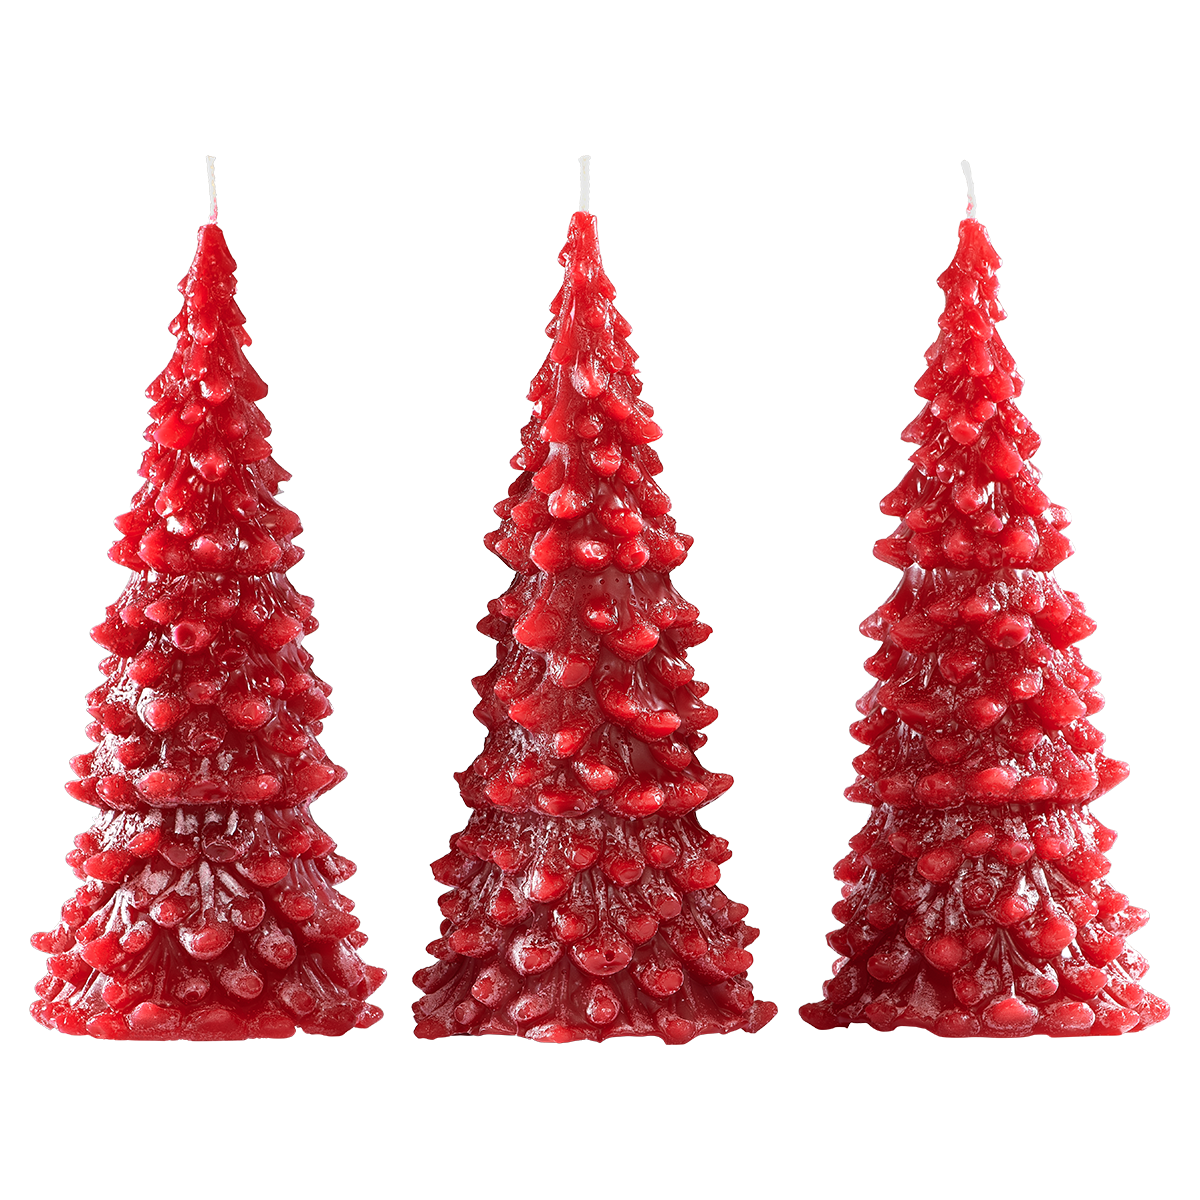 0000_christmas_tree_large_red_144_png.png